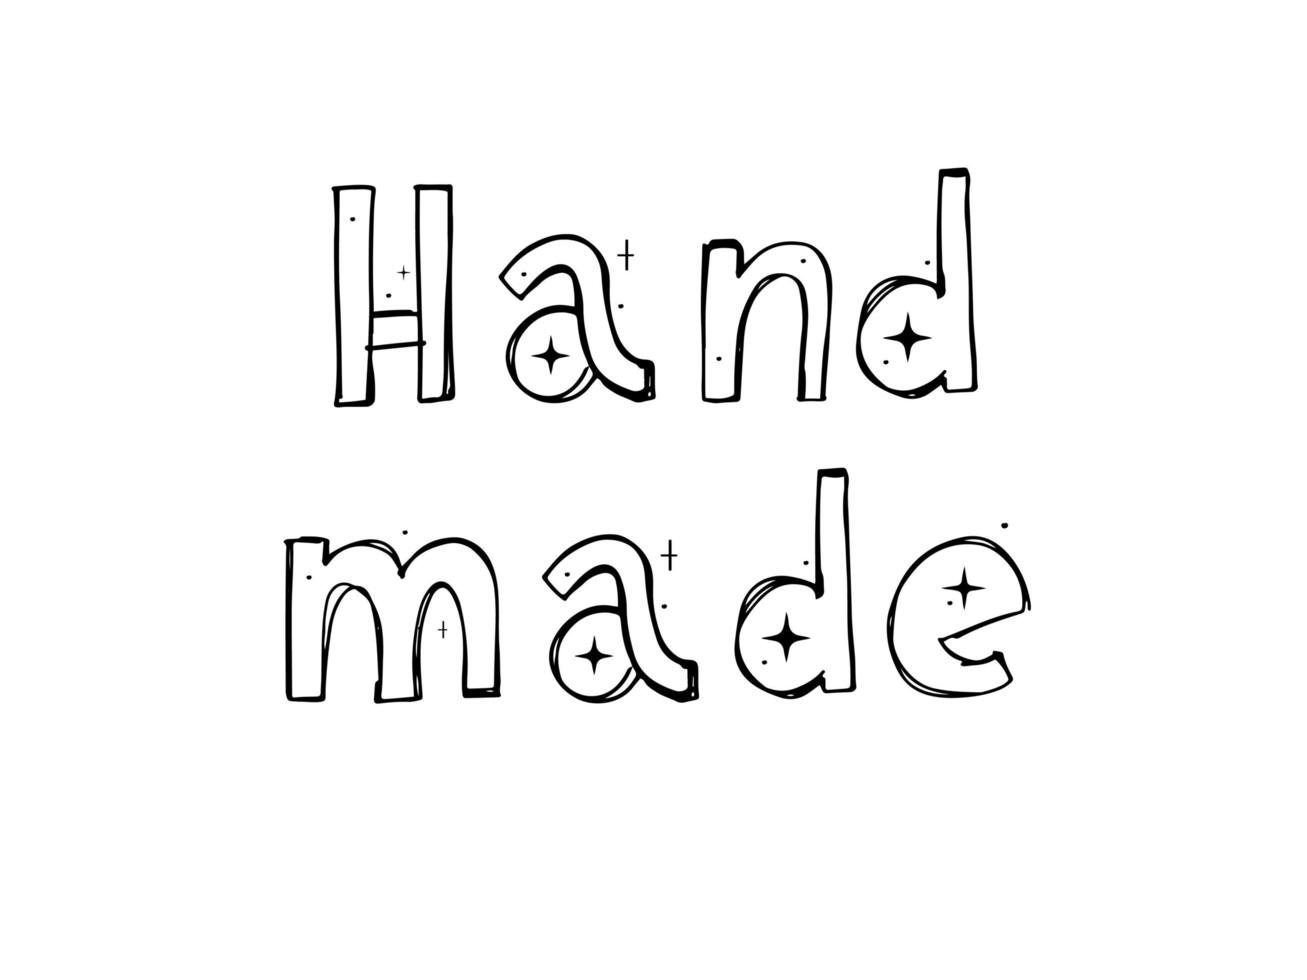 Hand made. Vector text font icon. Sign. Hand lettering.